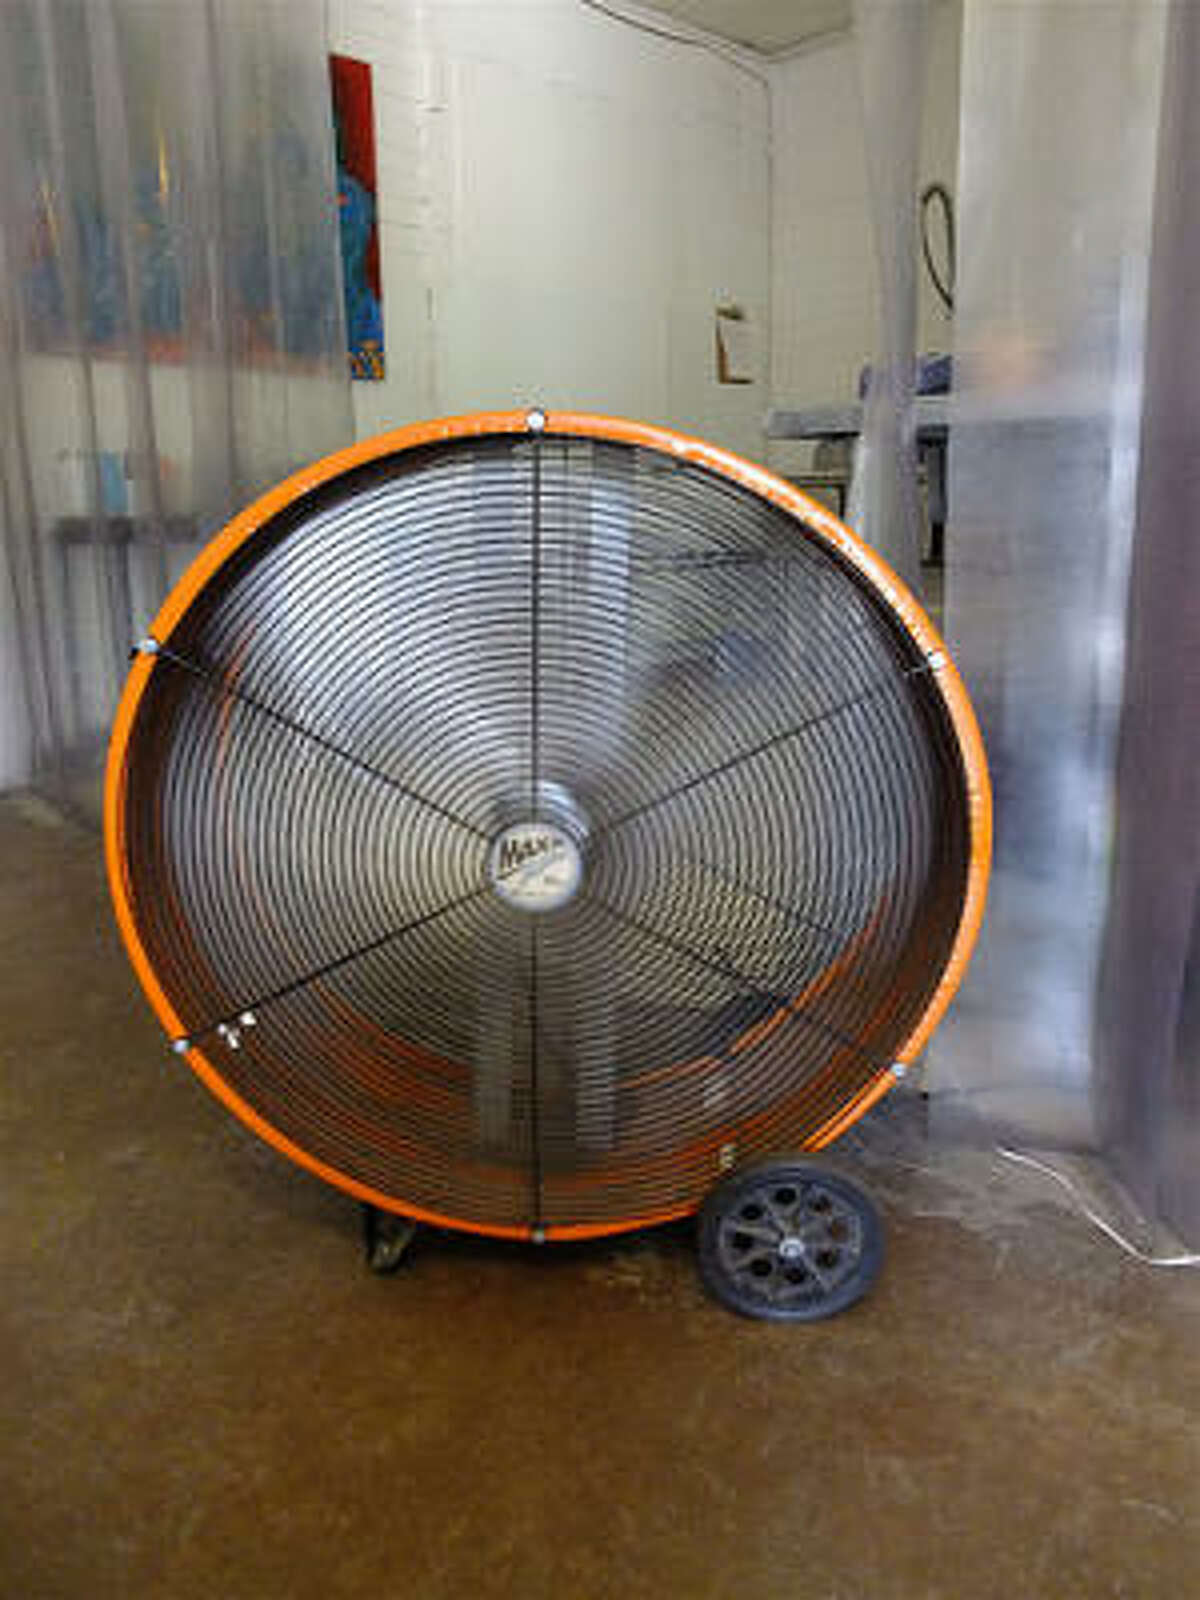 The Houston Dairymaids main warehouse space isn't air-conditioned, but a powerful industrial fan blasts visitors with cooling gusts. Iced-down beer & bottled water do the rest.